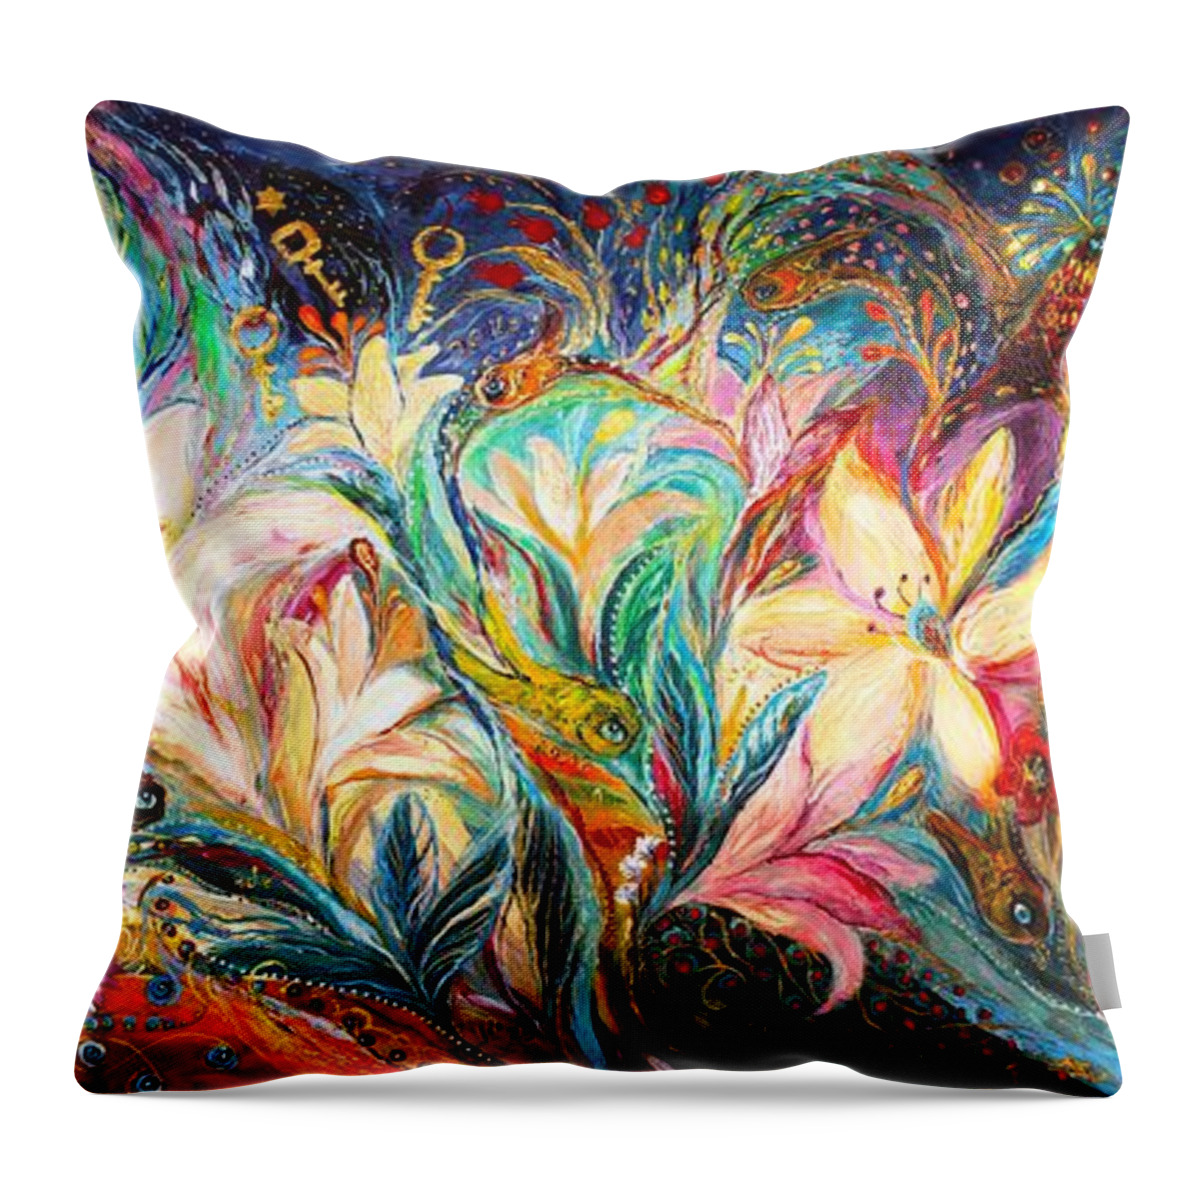 Original Throw Pillow featuring the painting The Herald of dawn by Elena Kotliarker